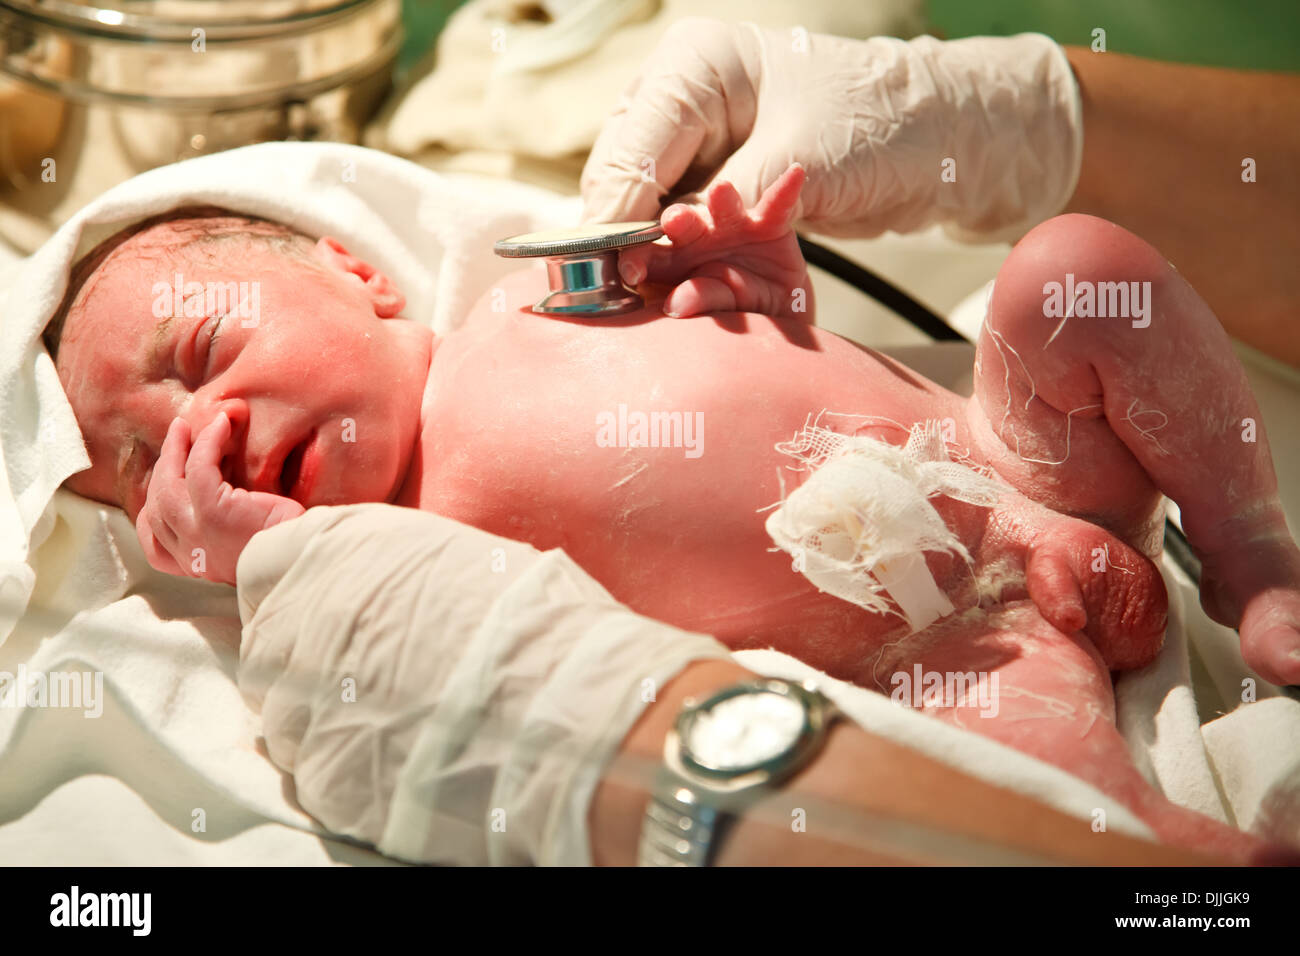 New born baby boy is being examined with a stethoscope after birth in the hospital  Stock Photo